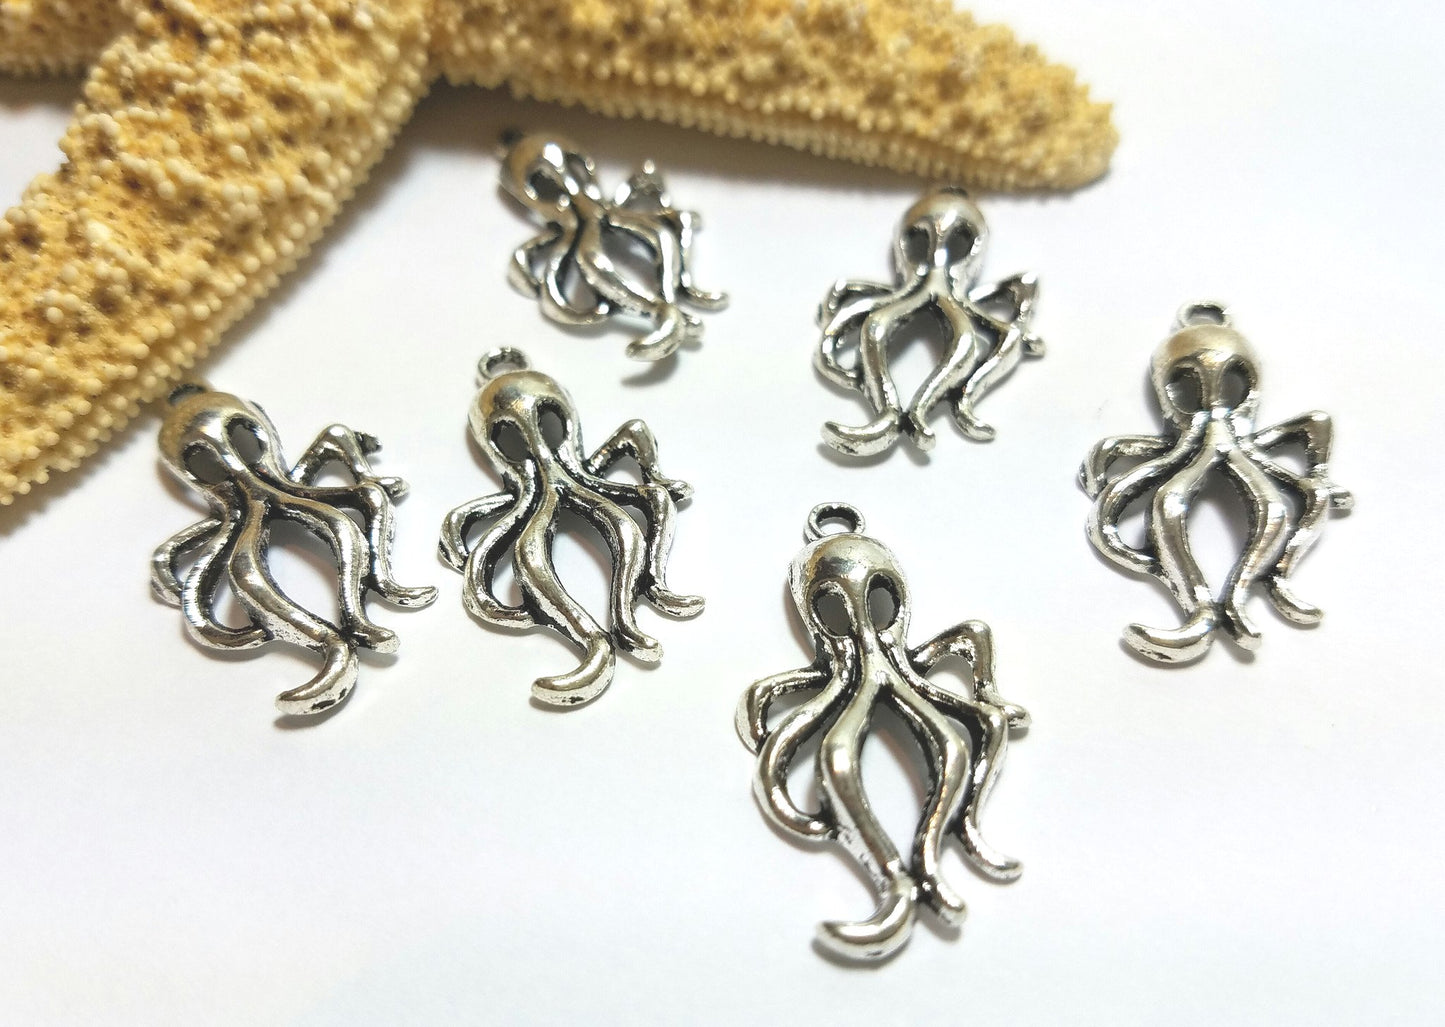 6 Octopus Charms